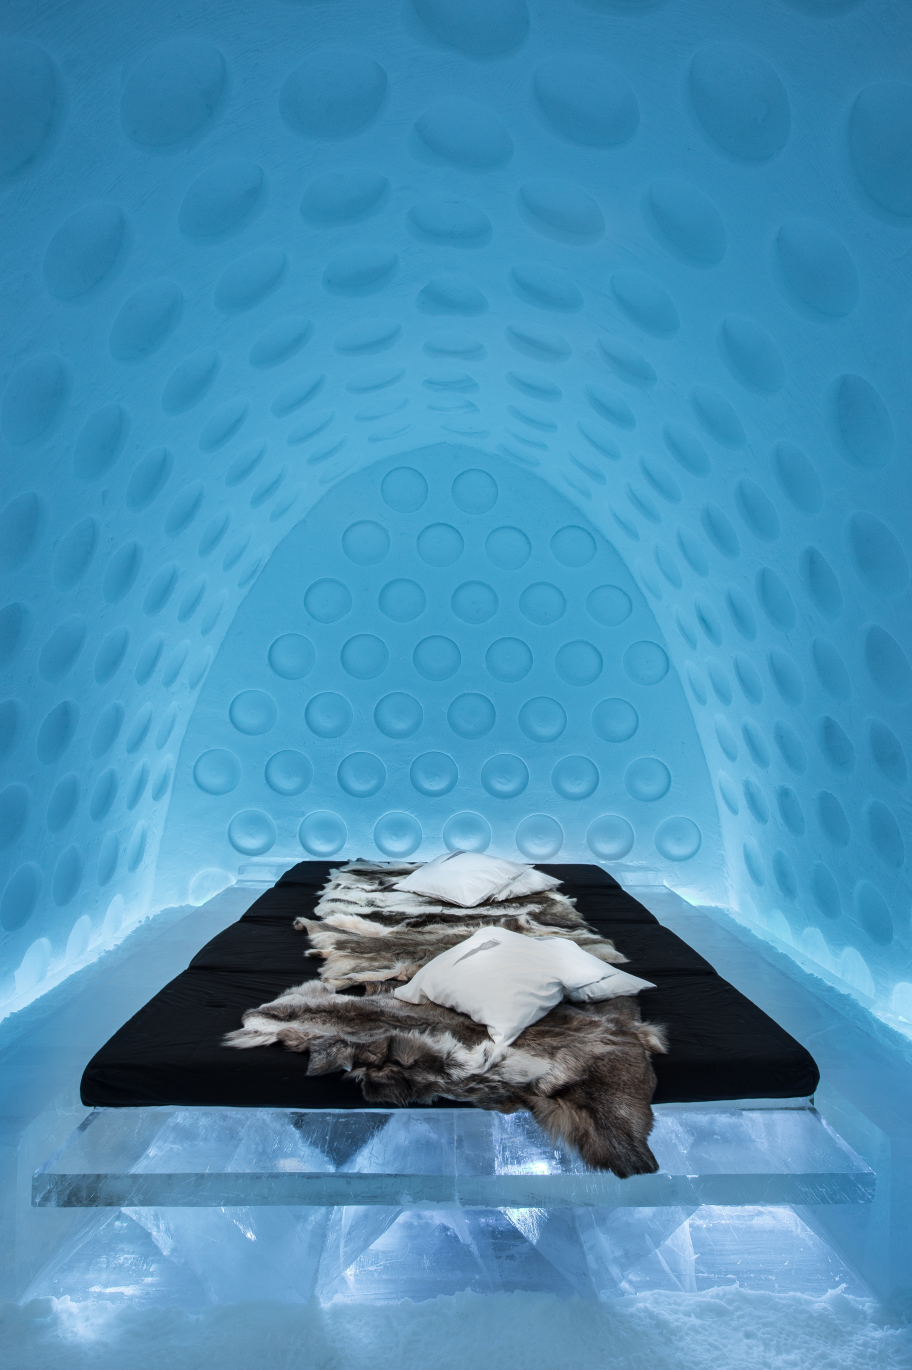 ICE HOTEL in Sweden | Art Suite 'Under the Arctic Skin', design by Rob Harding (Spain) and Timsam Harding (Spain) | 